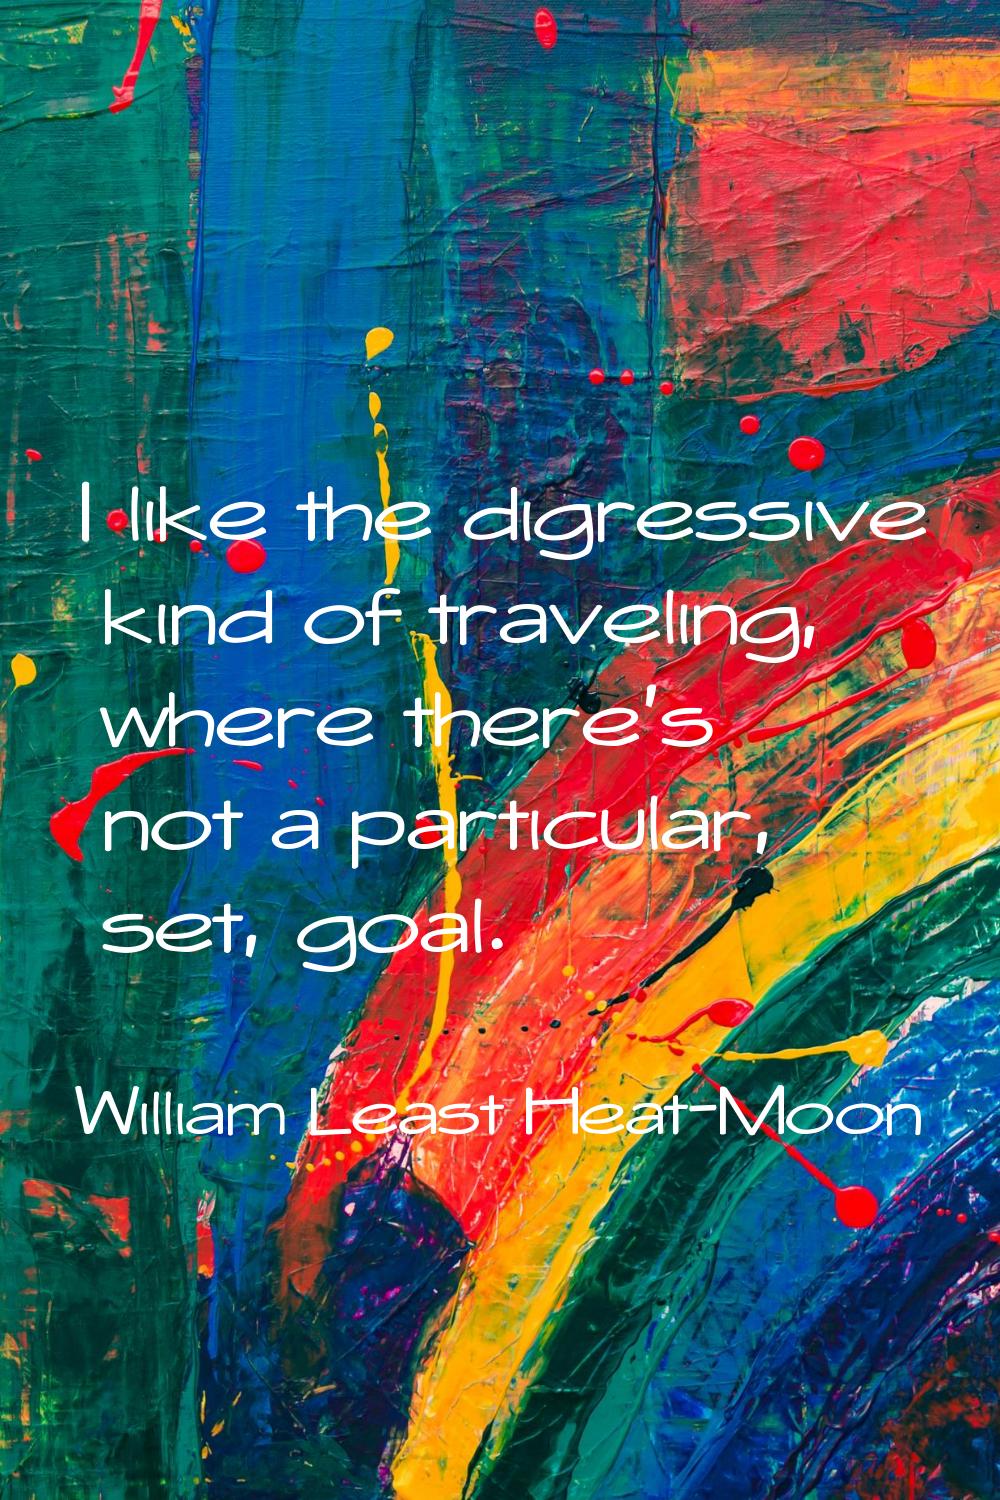 I like the digressive kind of traveling, where there's not a particular, set, goal.